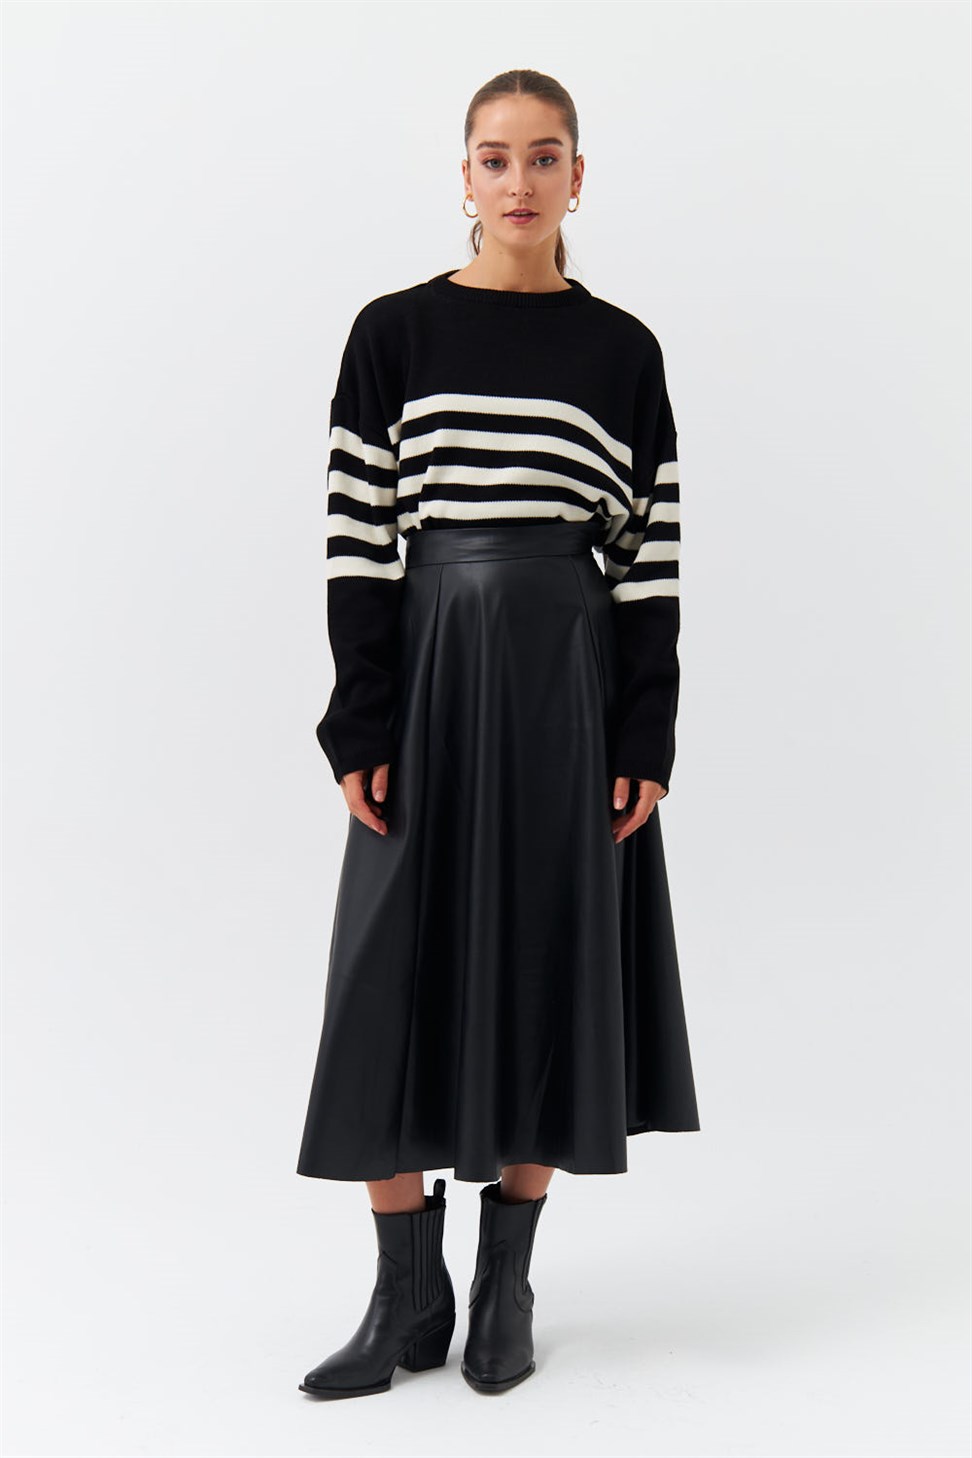 Modest Faux Leather Flared Black Skirt